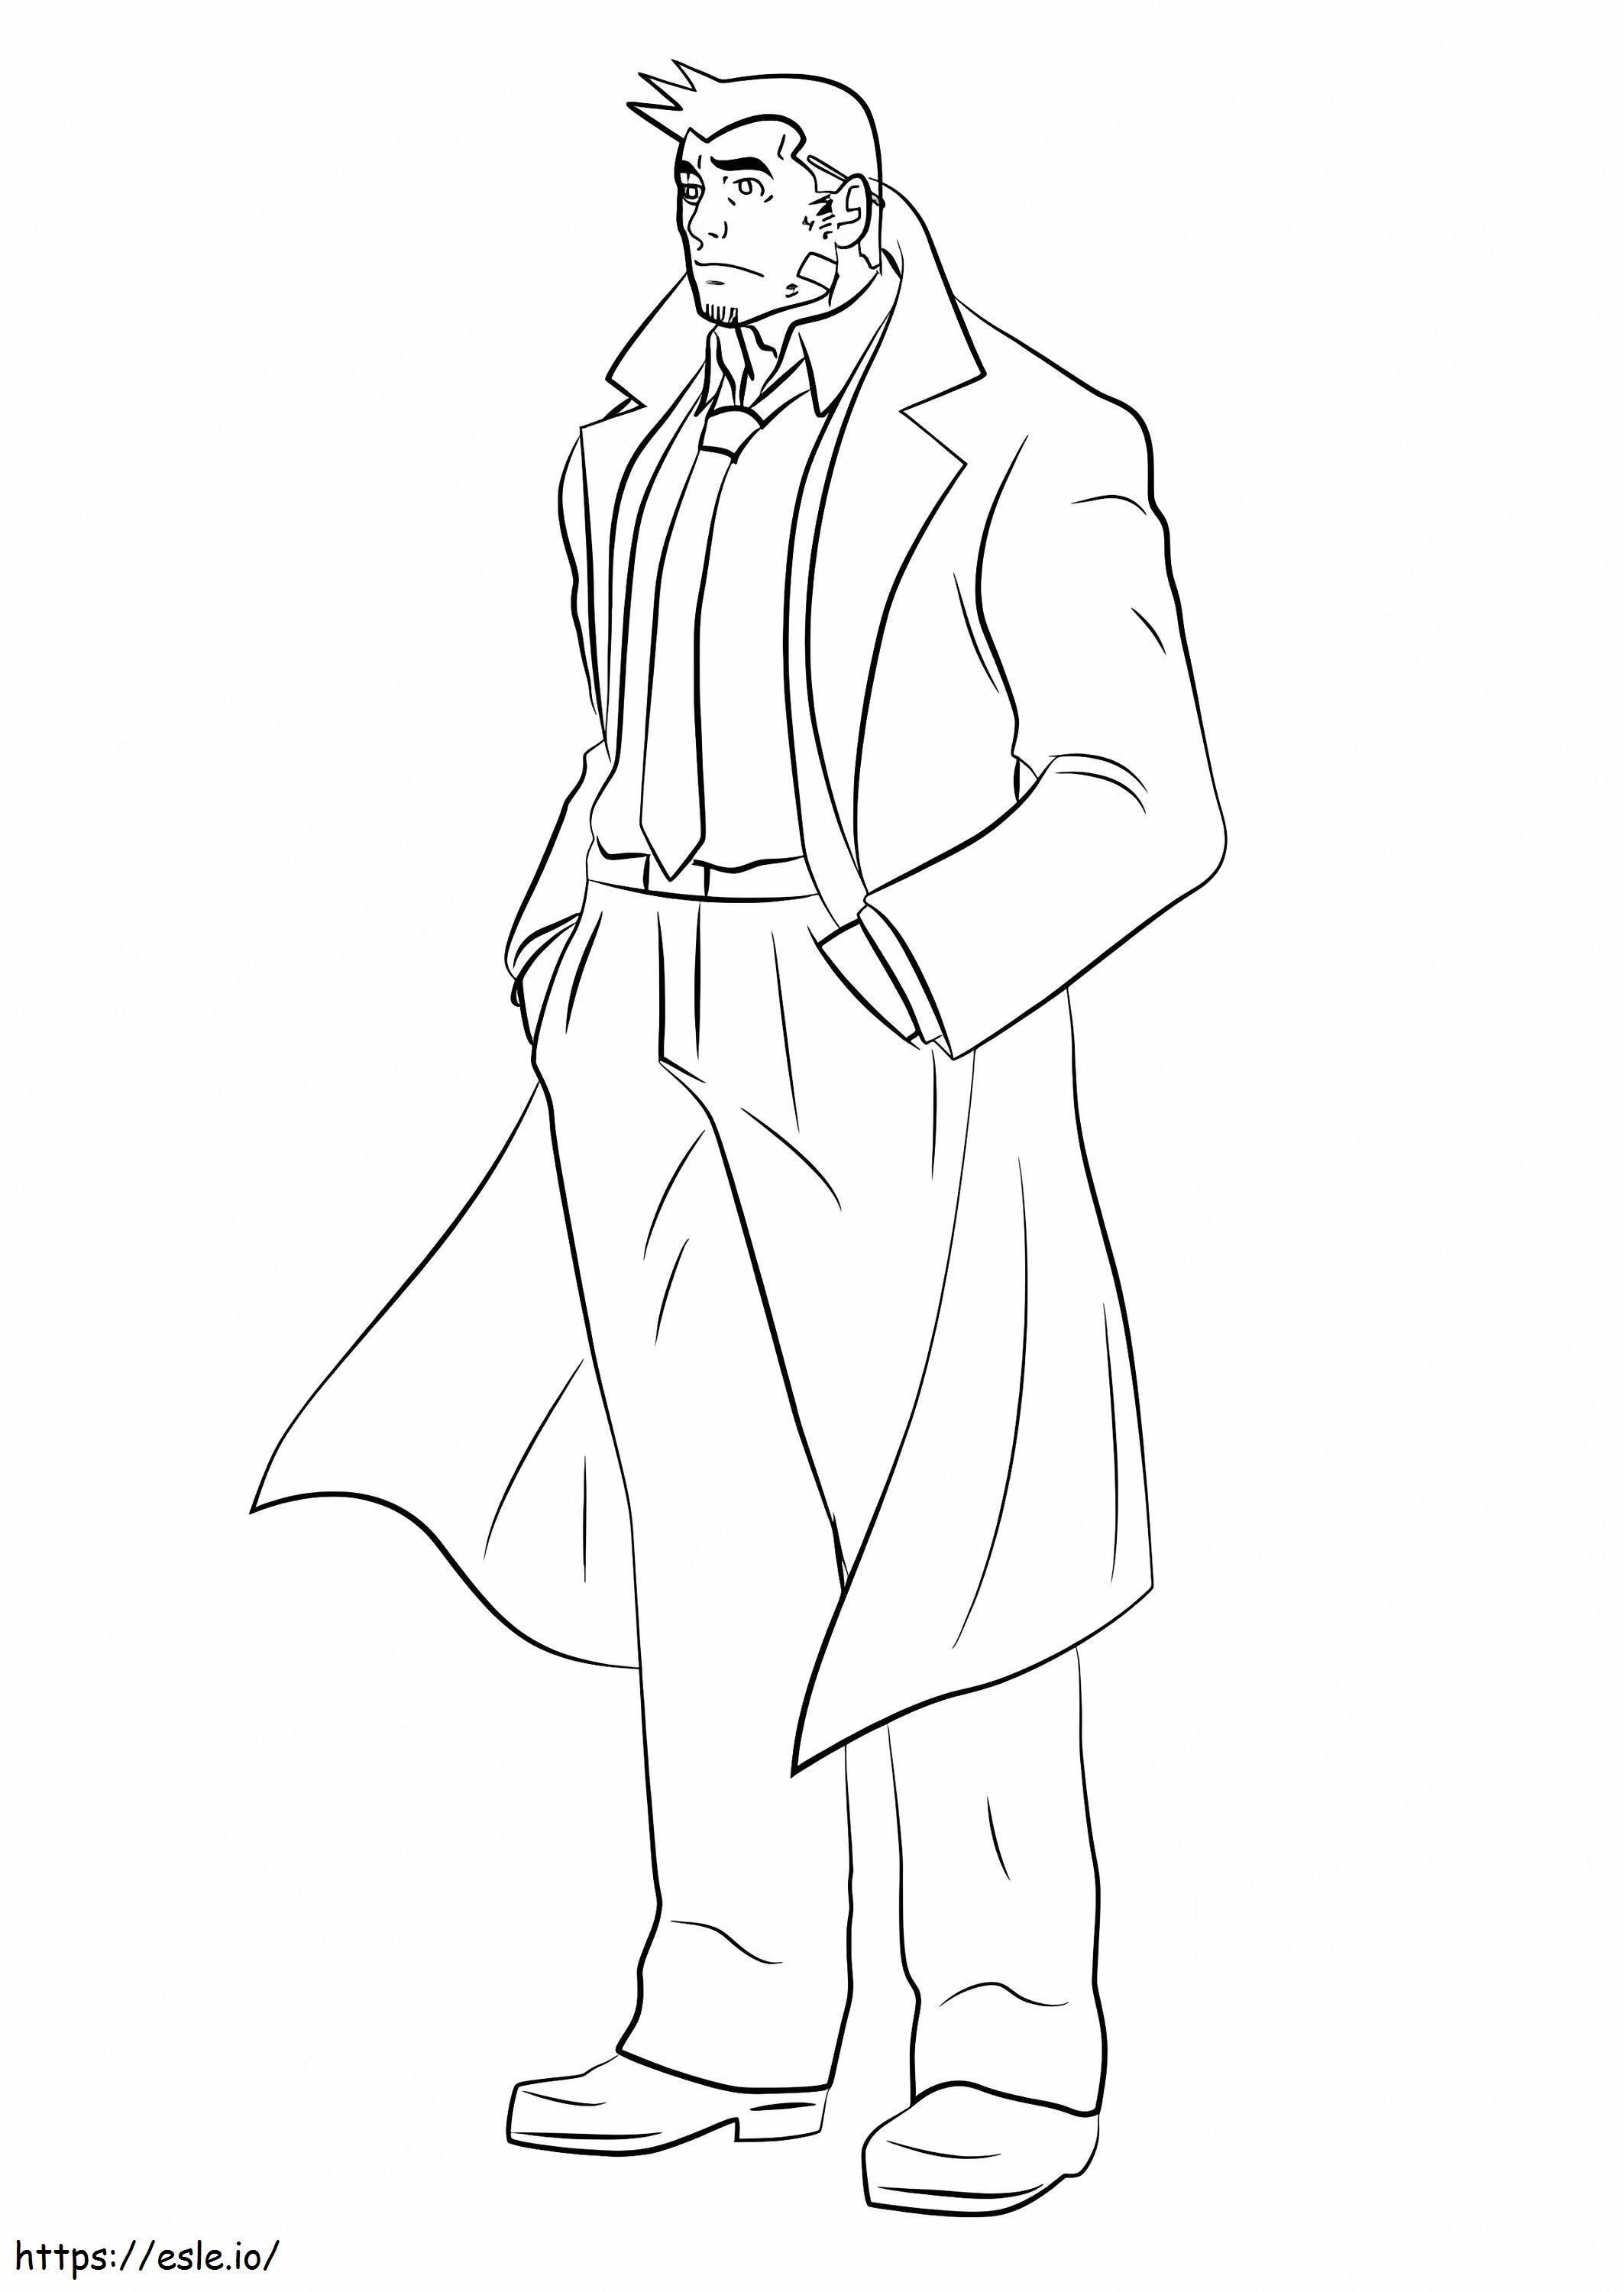 Dick Gumshoe From Ace Attorney coloring page